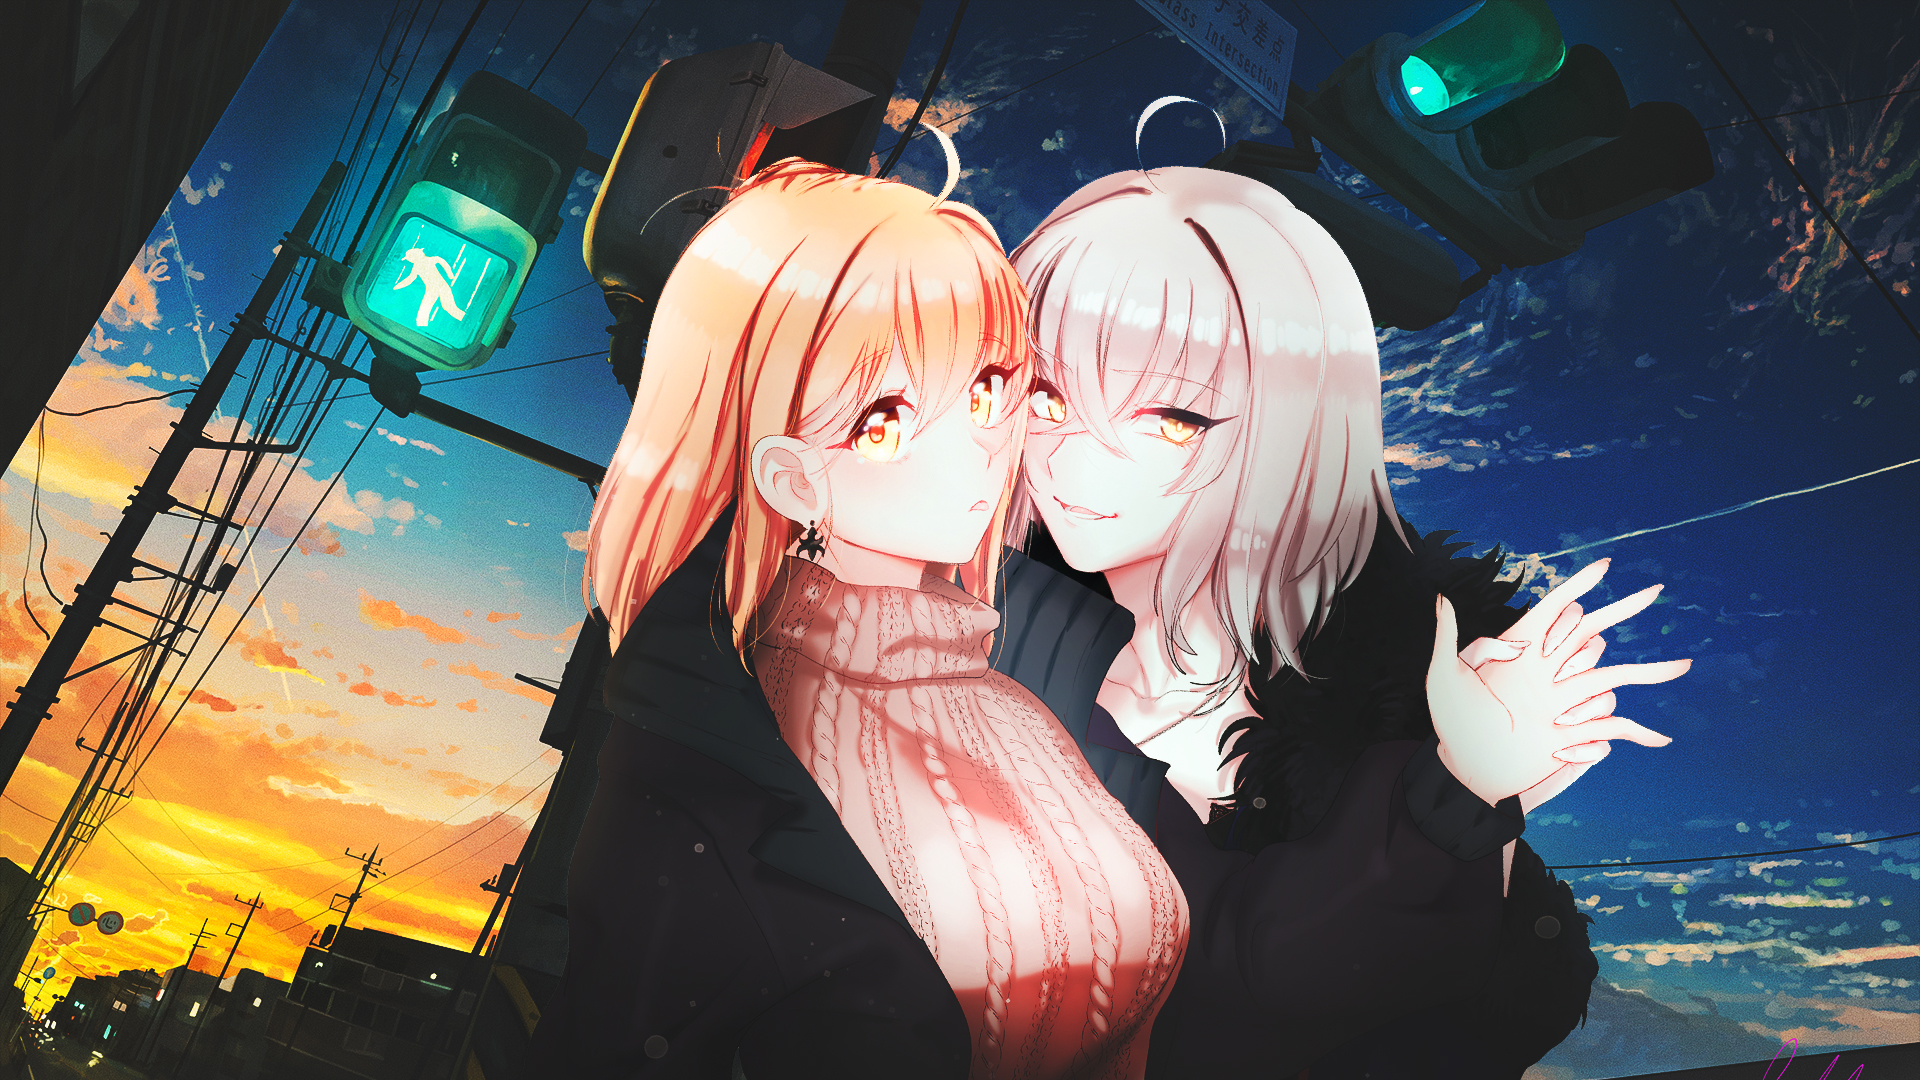 Anime 1920x1080 anime anime girls city Japan night Fate series smiling looking at viewer earring sunset sunset glow sky clouds street light